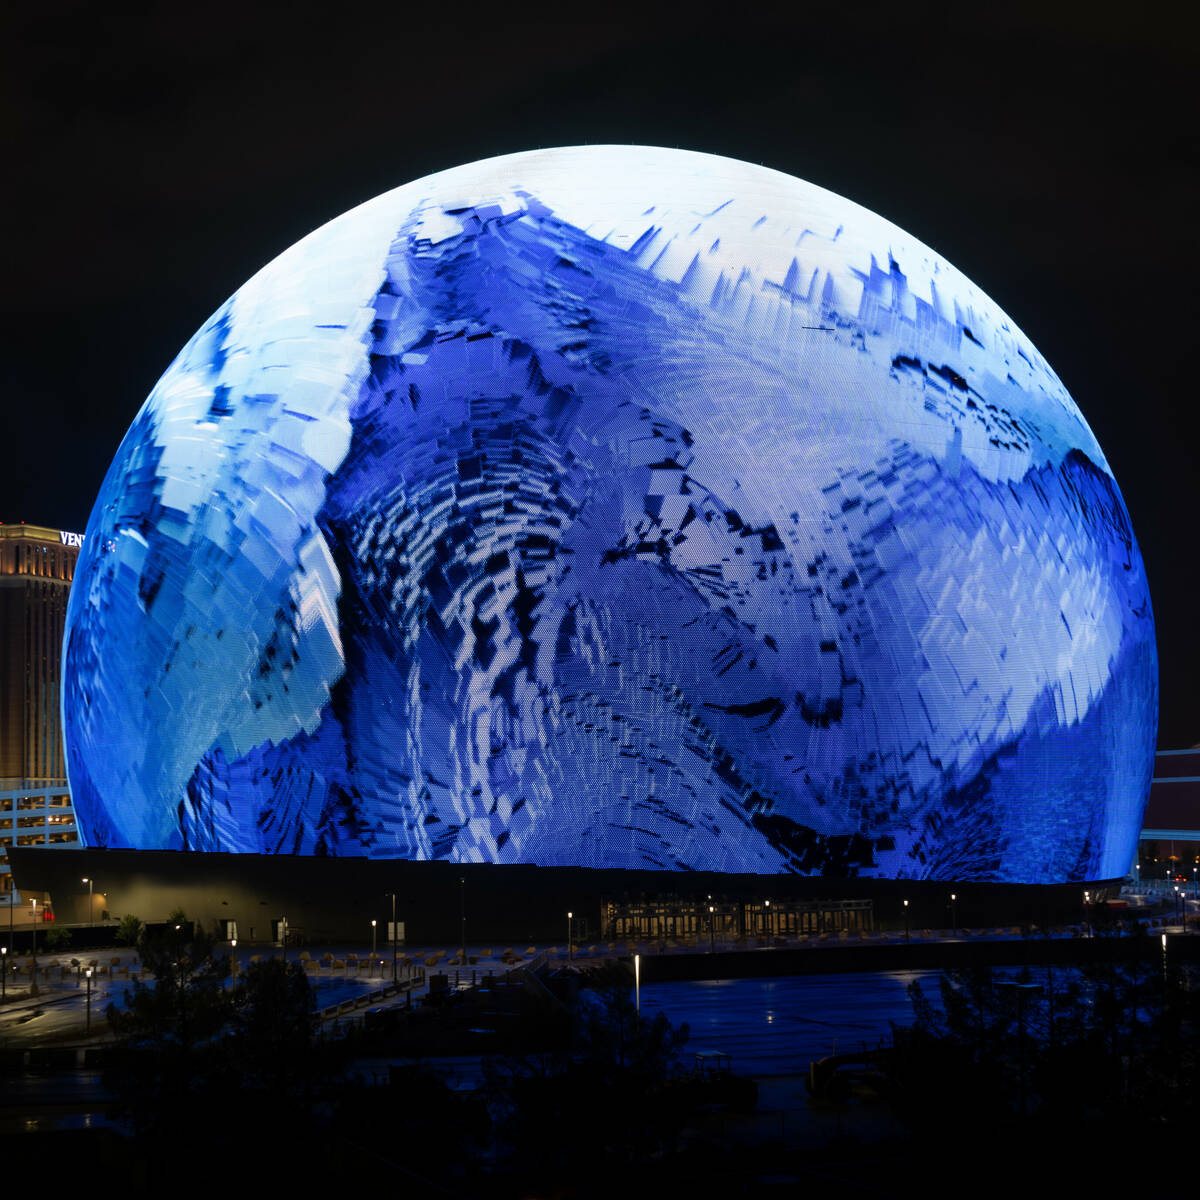 Artist Refik Anadol, whose site-specific works utilize machine learning, kicked off Sphere’s ...